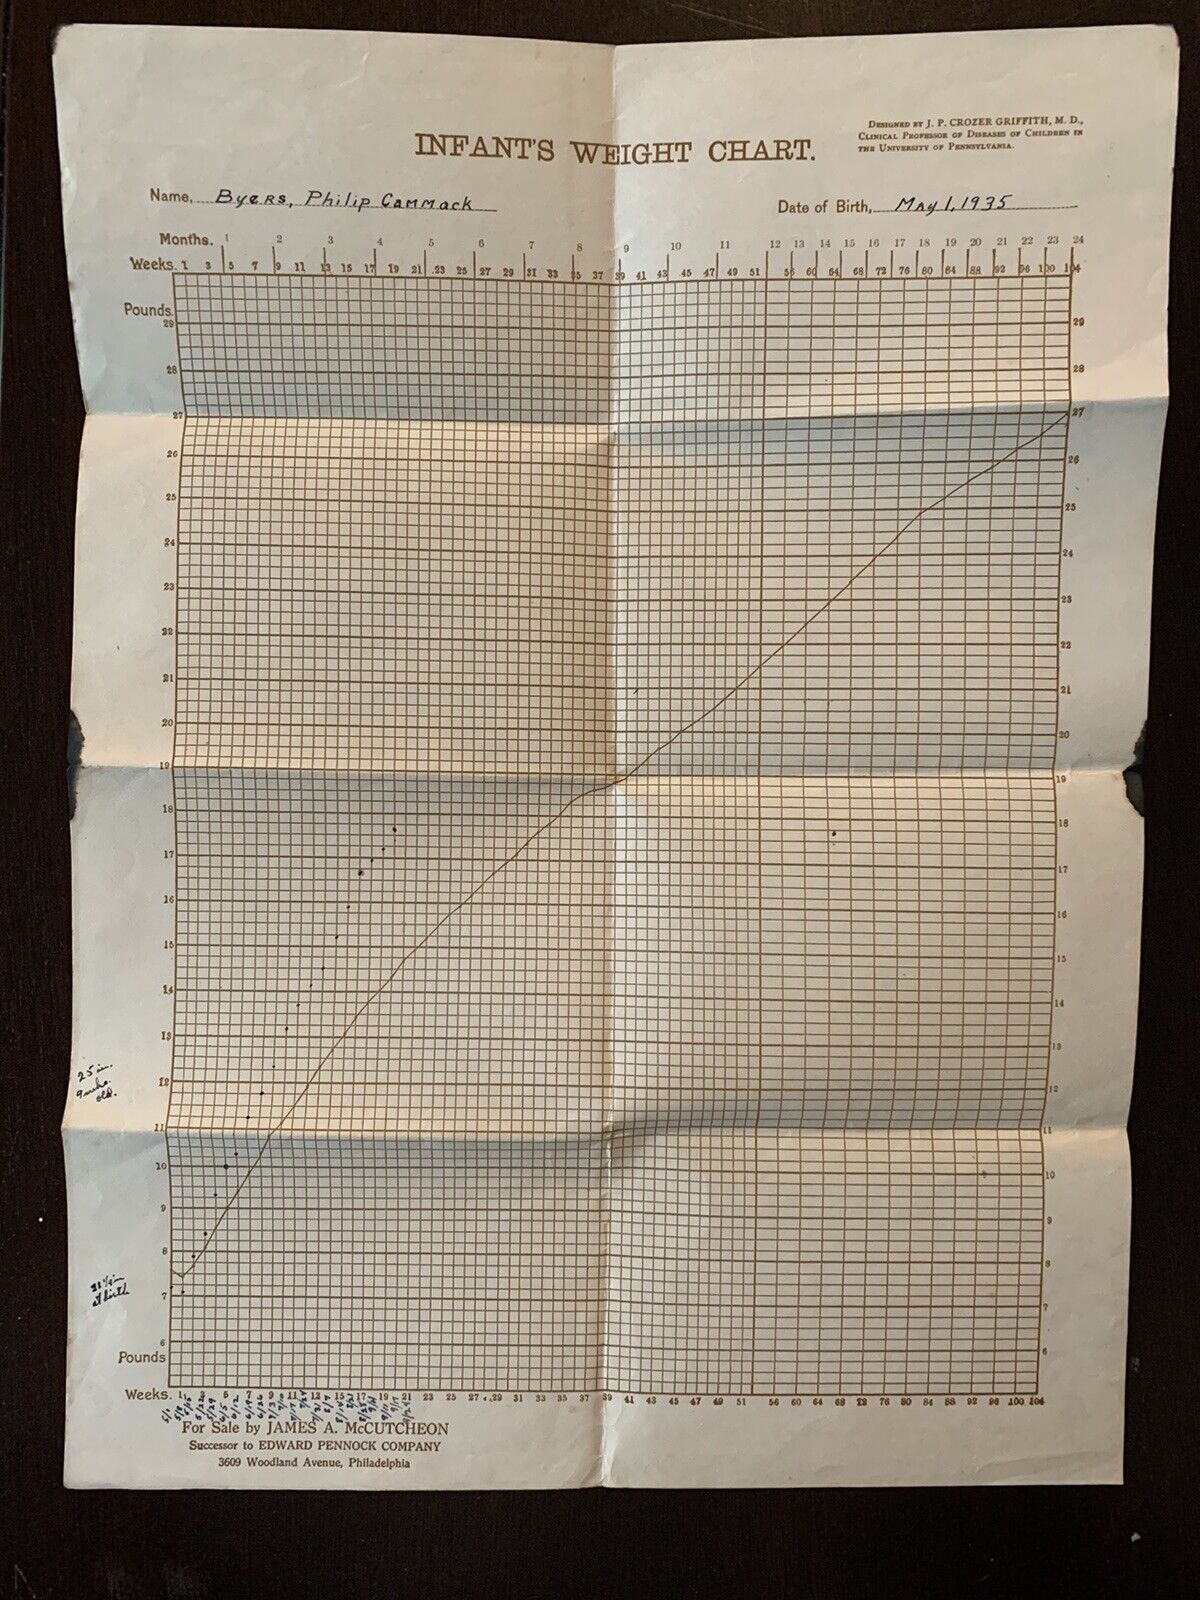 1935 BABY INFANT WEIGHT CHART POUNDS WEEKS